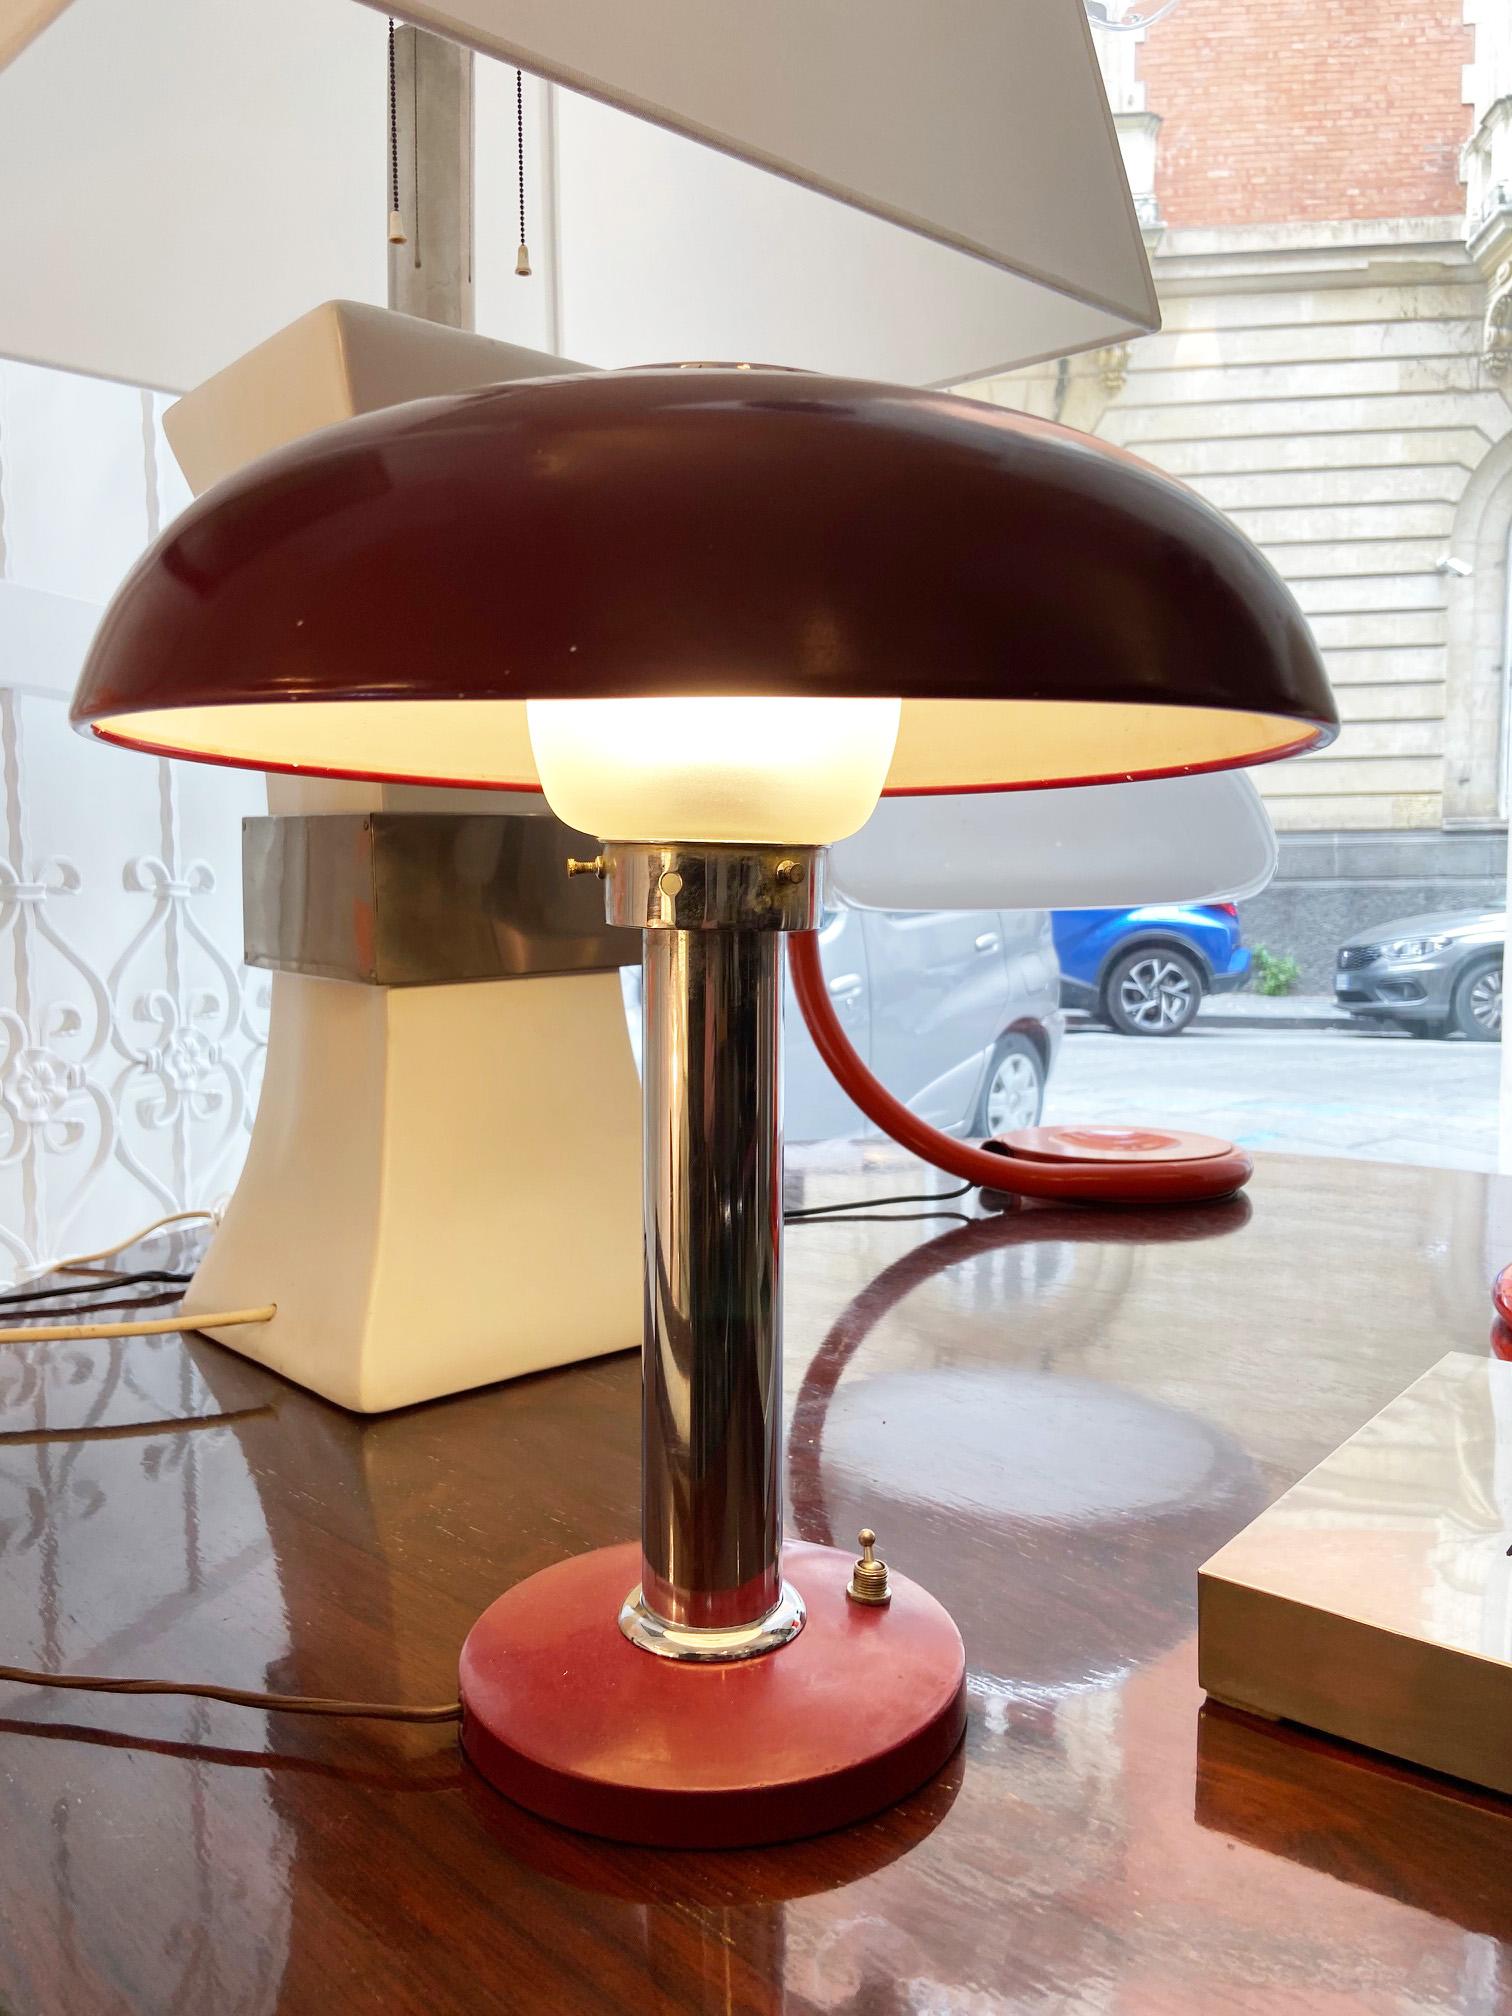 This table lamp model no. 546 from the 1940s is in painted and chromed metal with a satin glass shade, and was designed by Giò Ponti for Ugo Pollice.